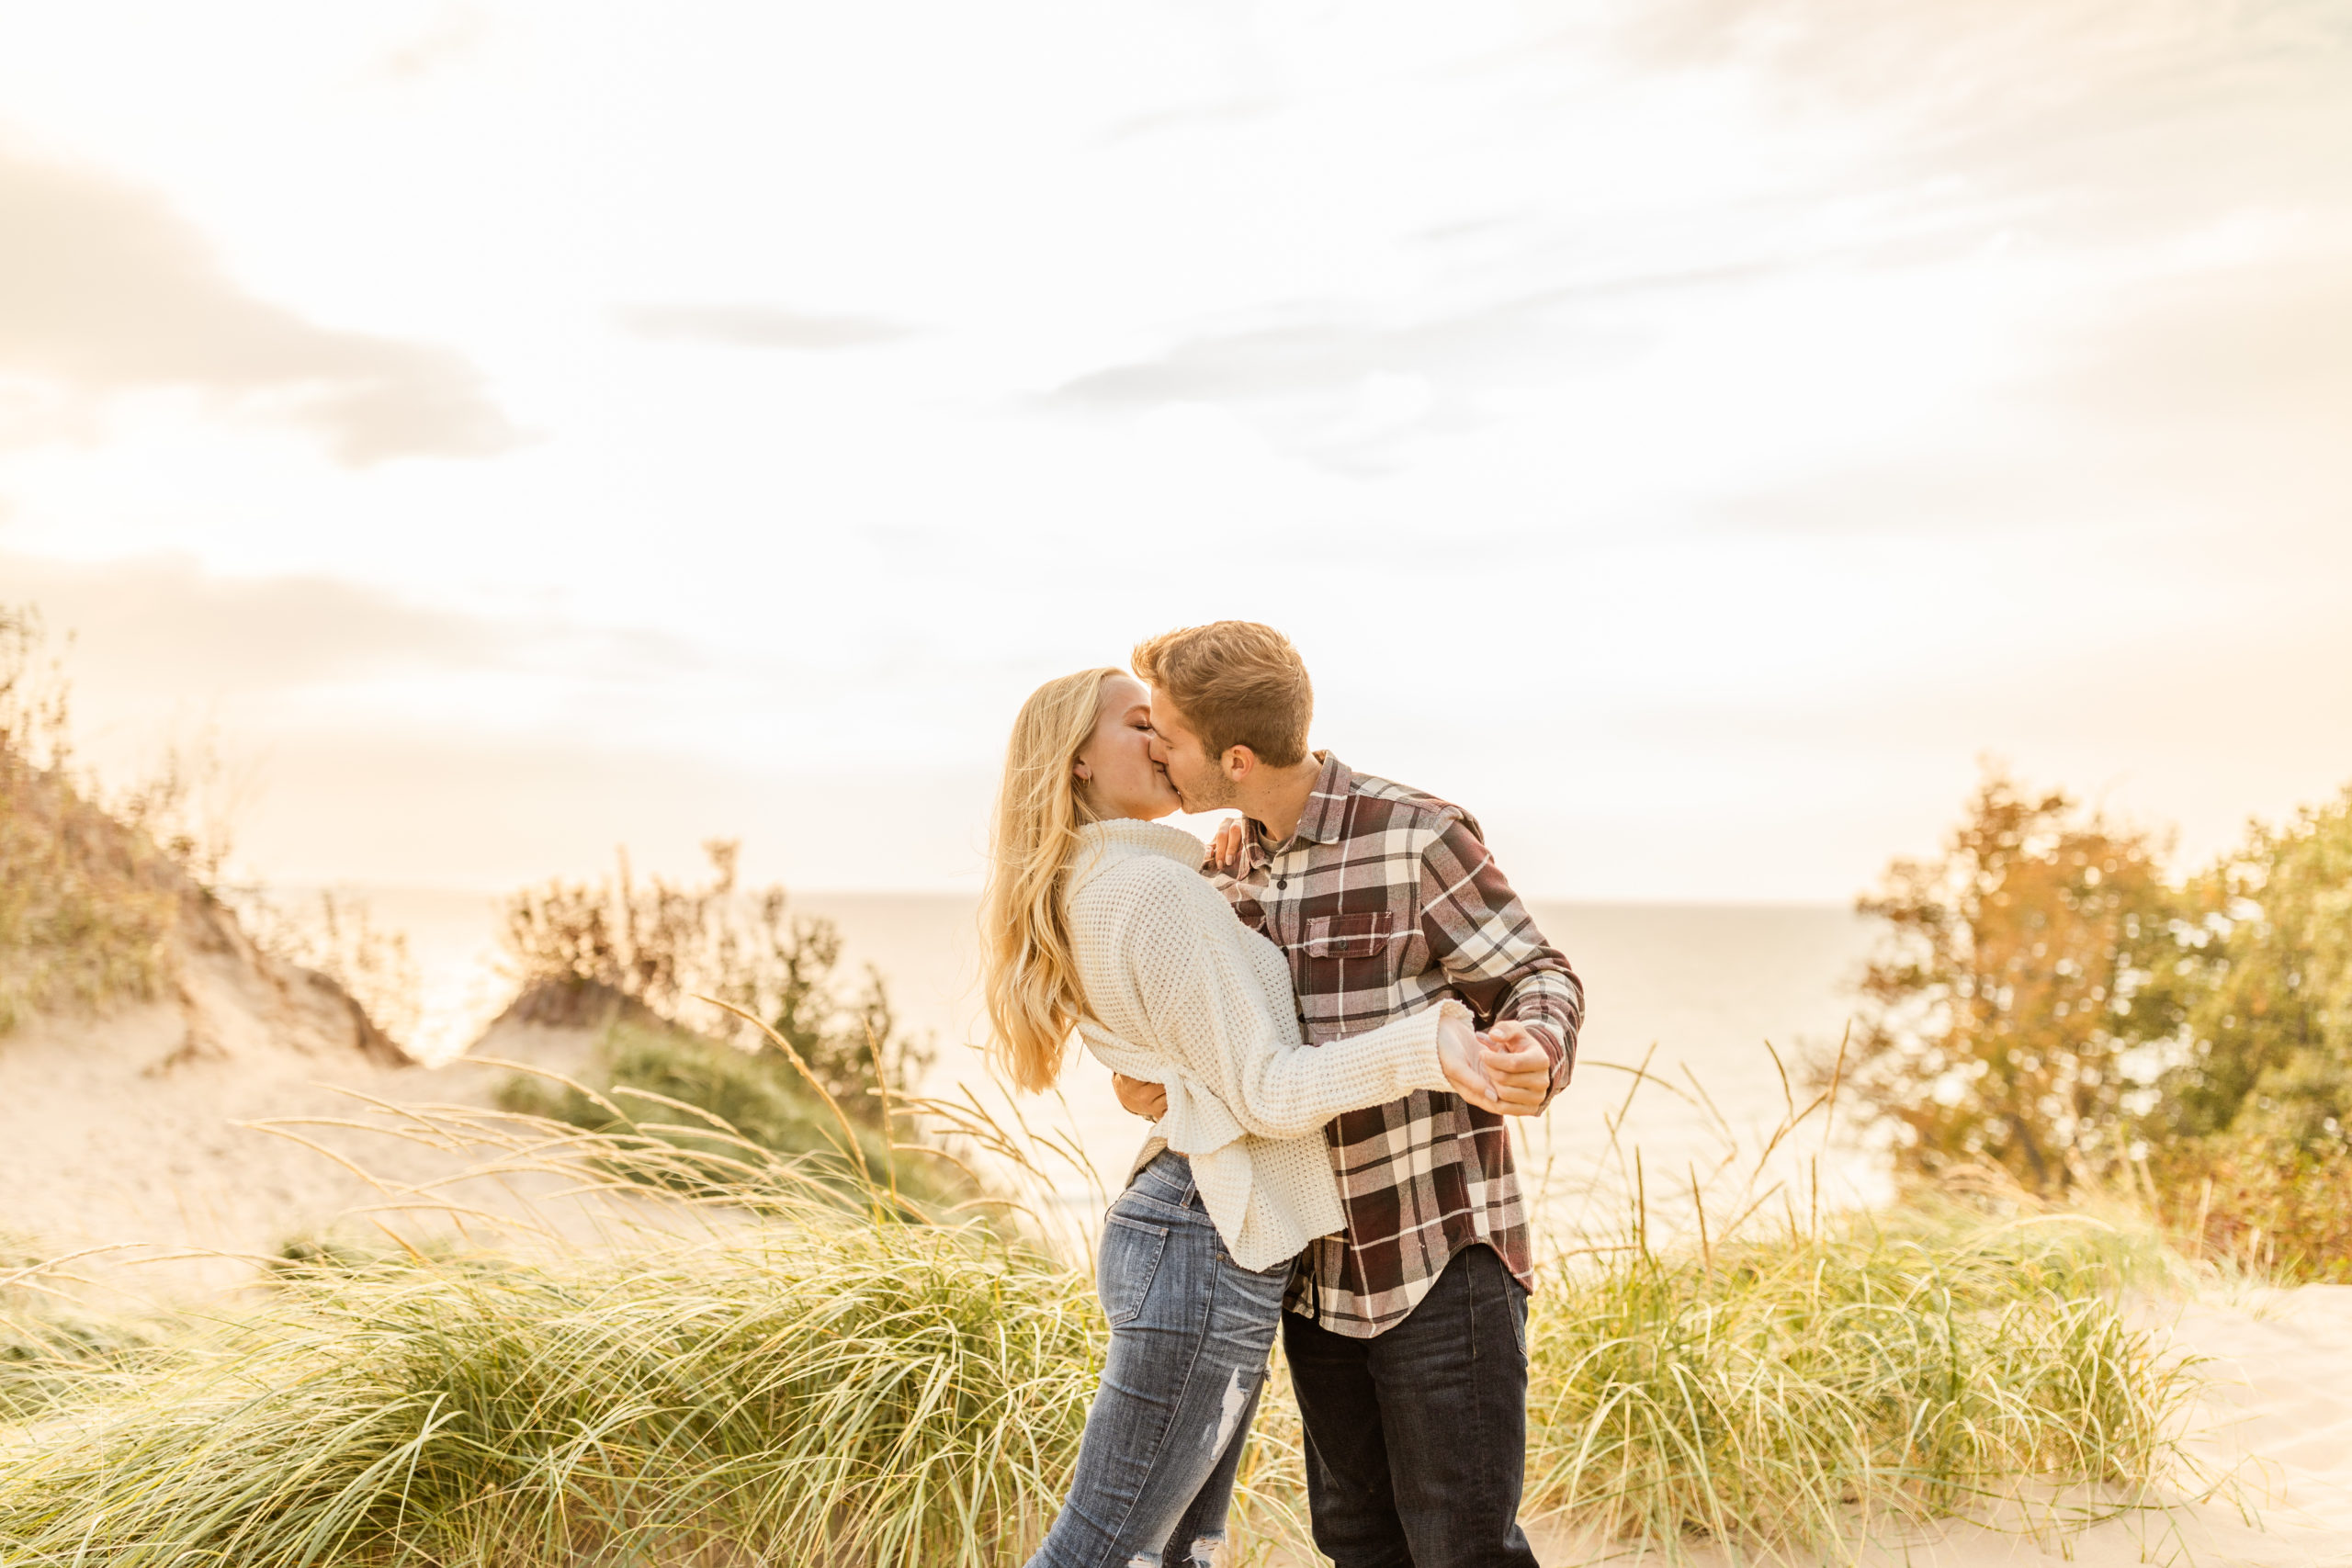 Lake Michigan Engagement Photoshoot in the dunes in autumn